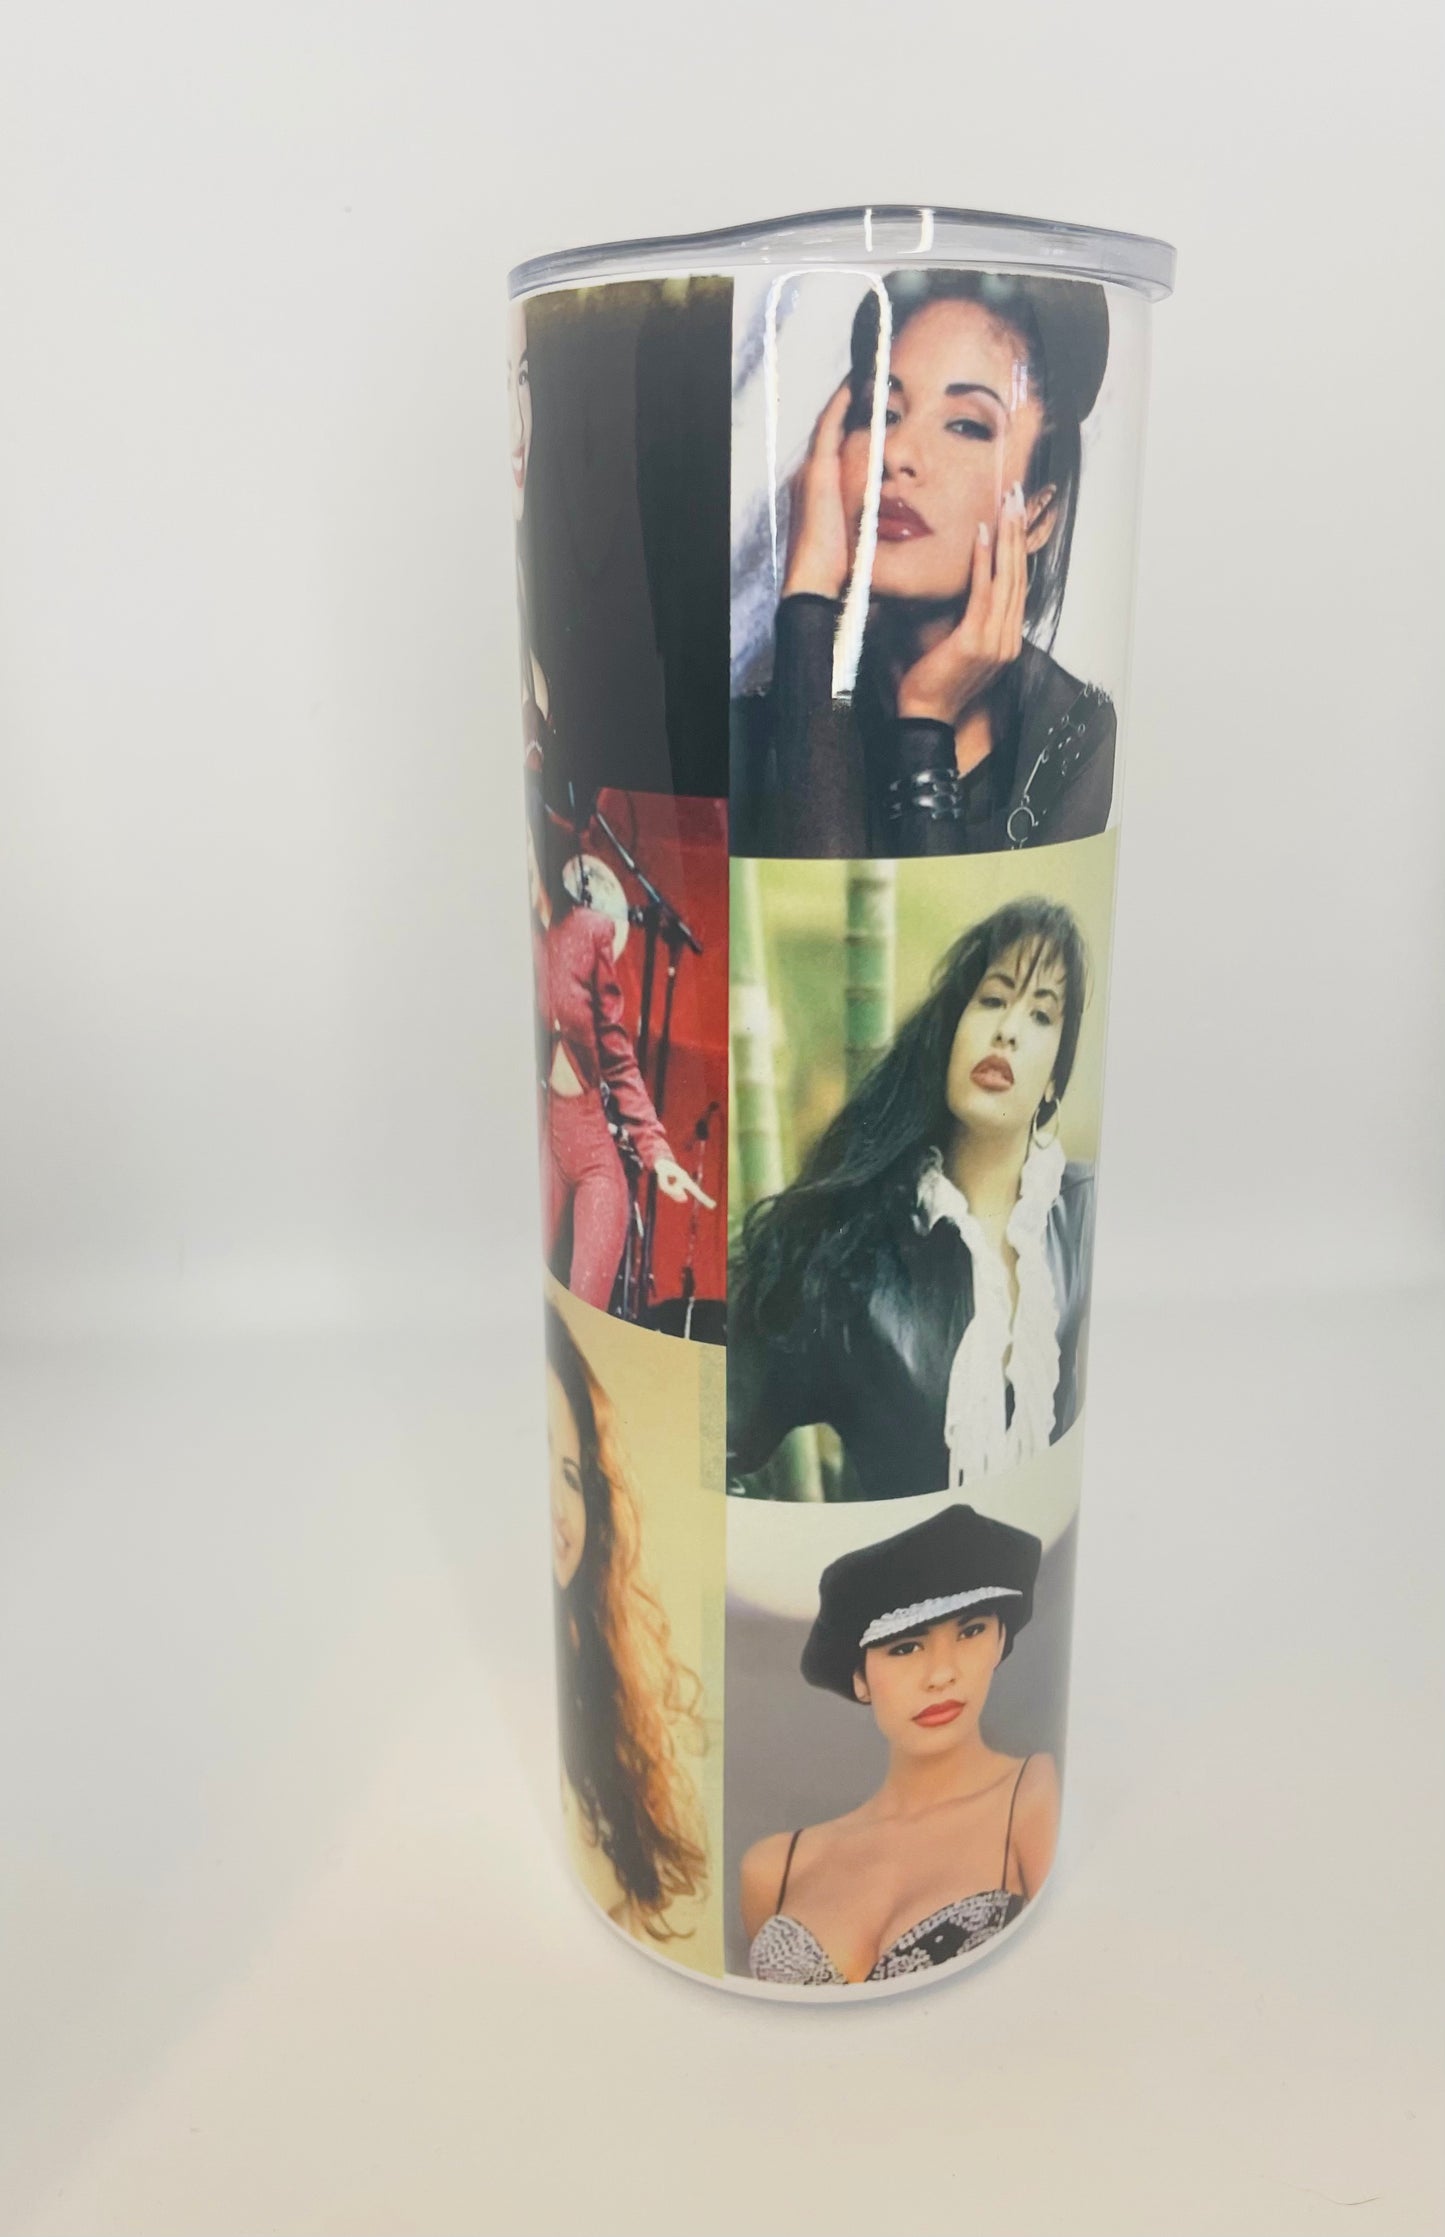 Customized Tumblers, Custom Made Cups, Personalized Tumblers, Personalized Cups, Selena, Selena Customized Tumblers, Selena Cup, Coffee Cups, Tumblers, Unique Gifts, Personalized Gifts